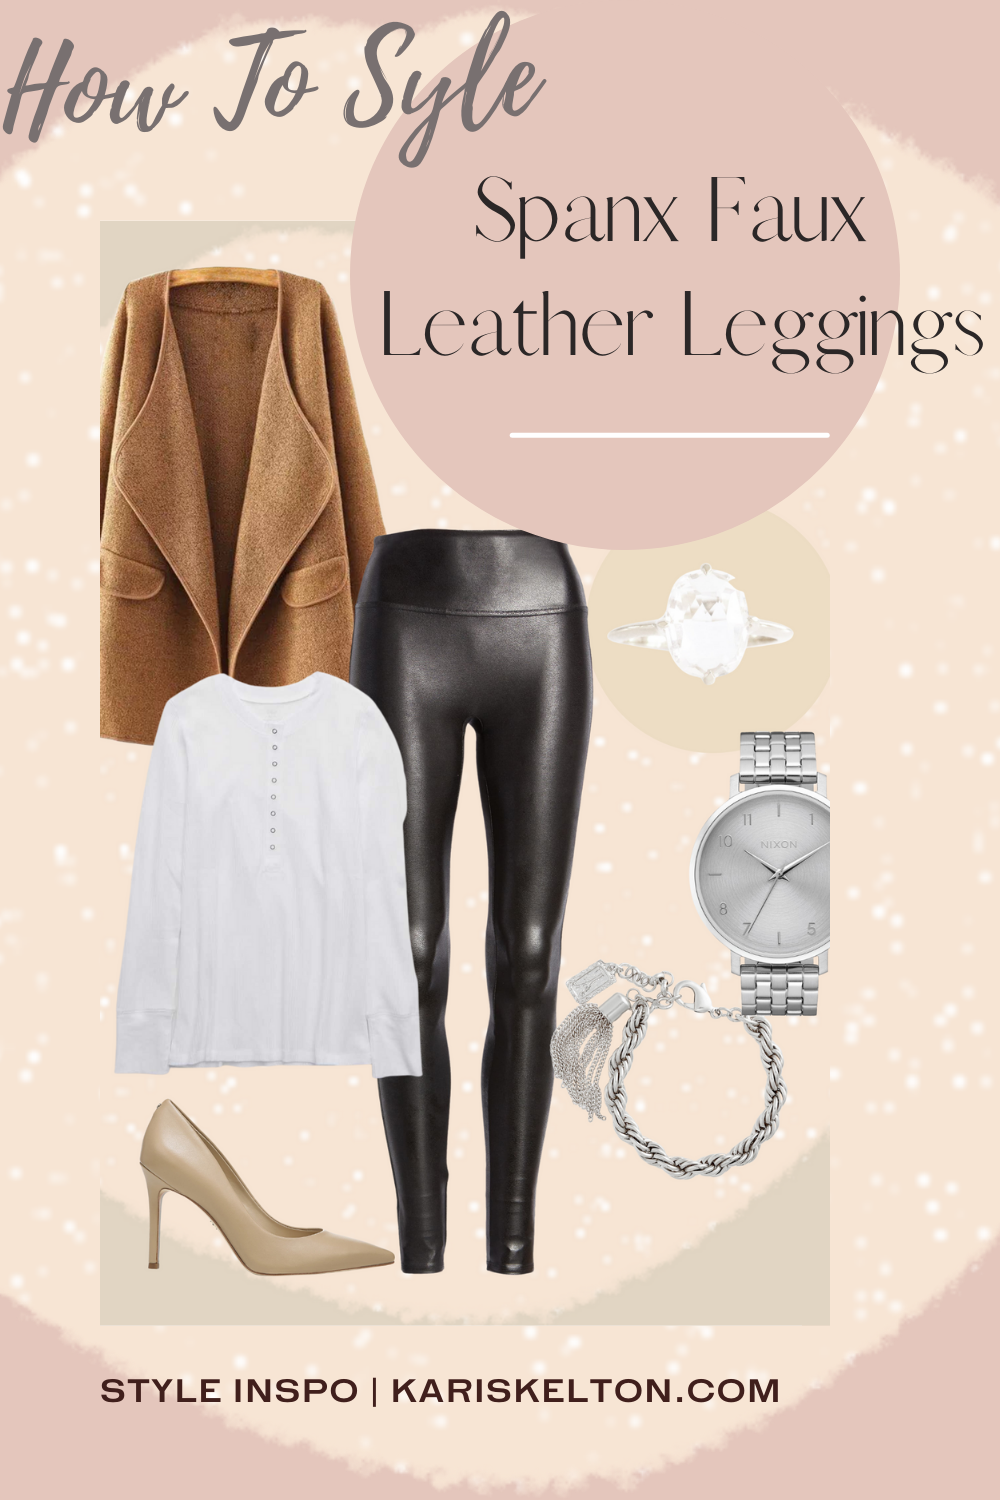 How to Wear Leggings: 8 Celeb Outfits That Are So 2023 | Who What Wear